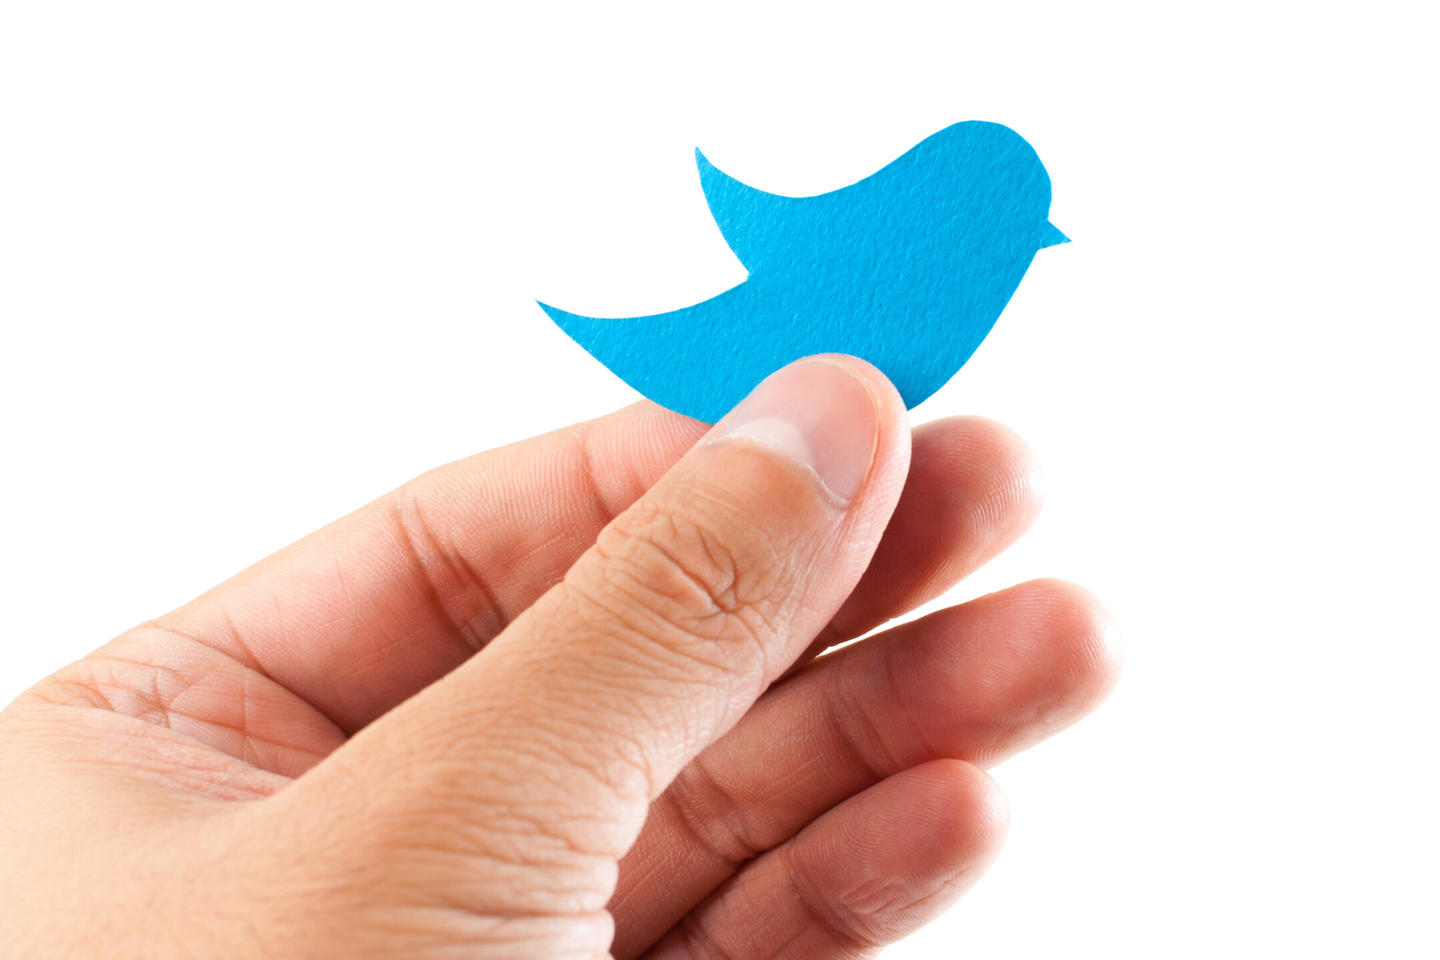 A person holds a cutout of the Twitter logo in their hand.